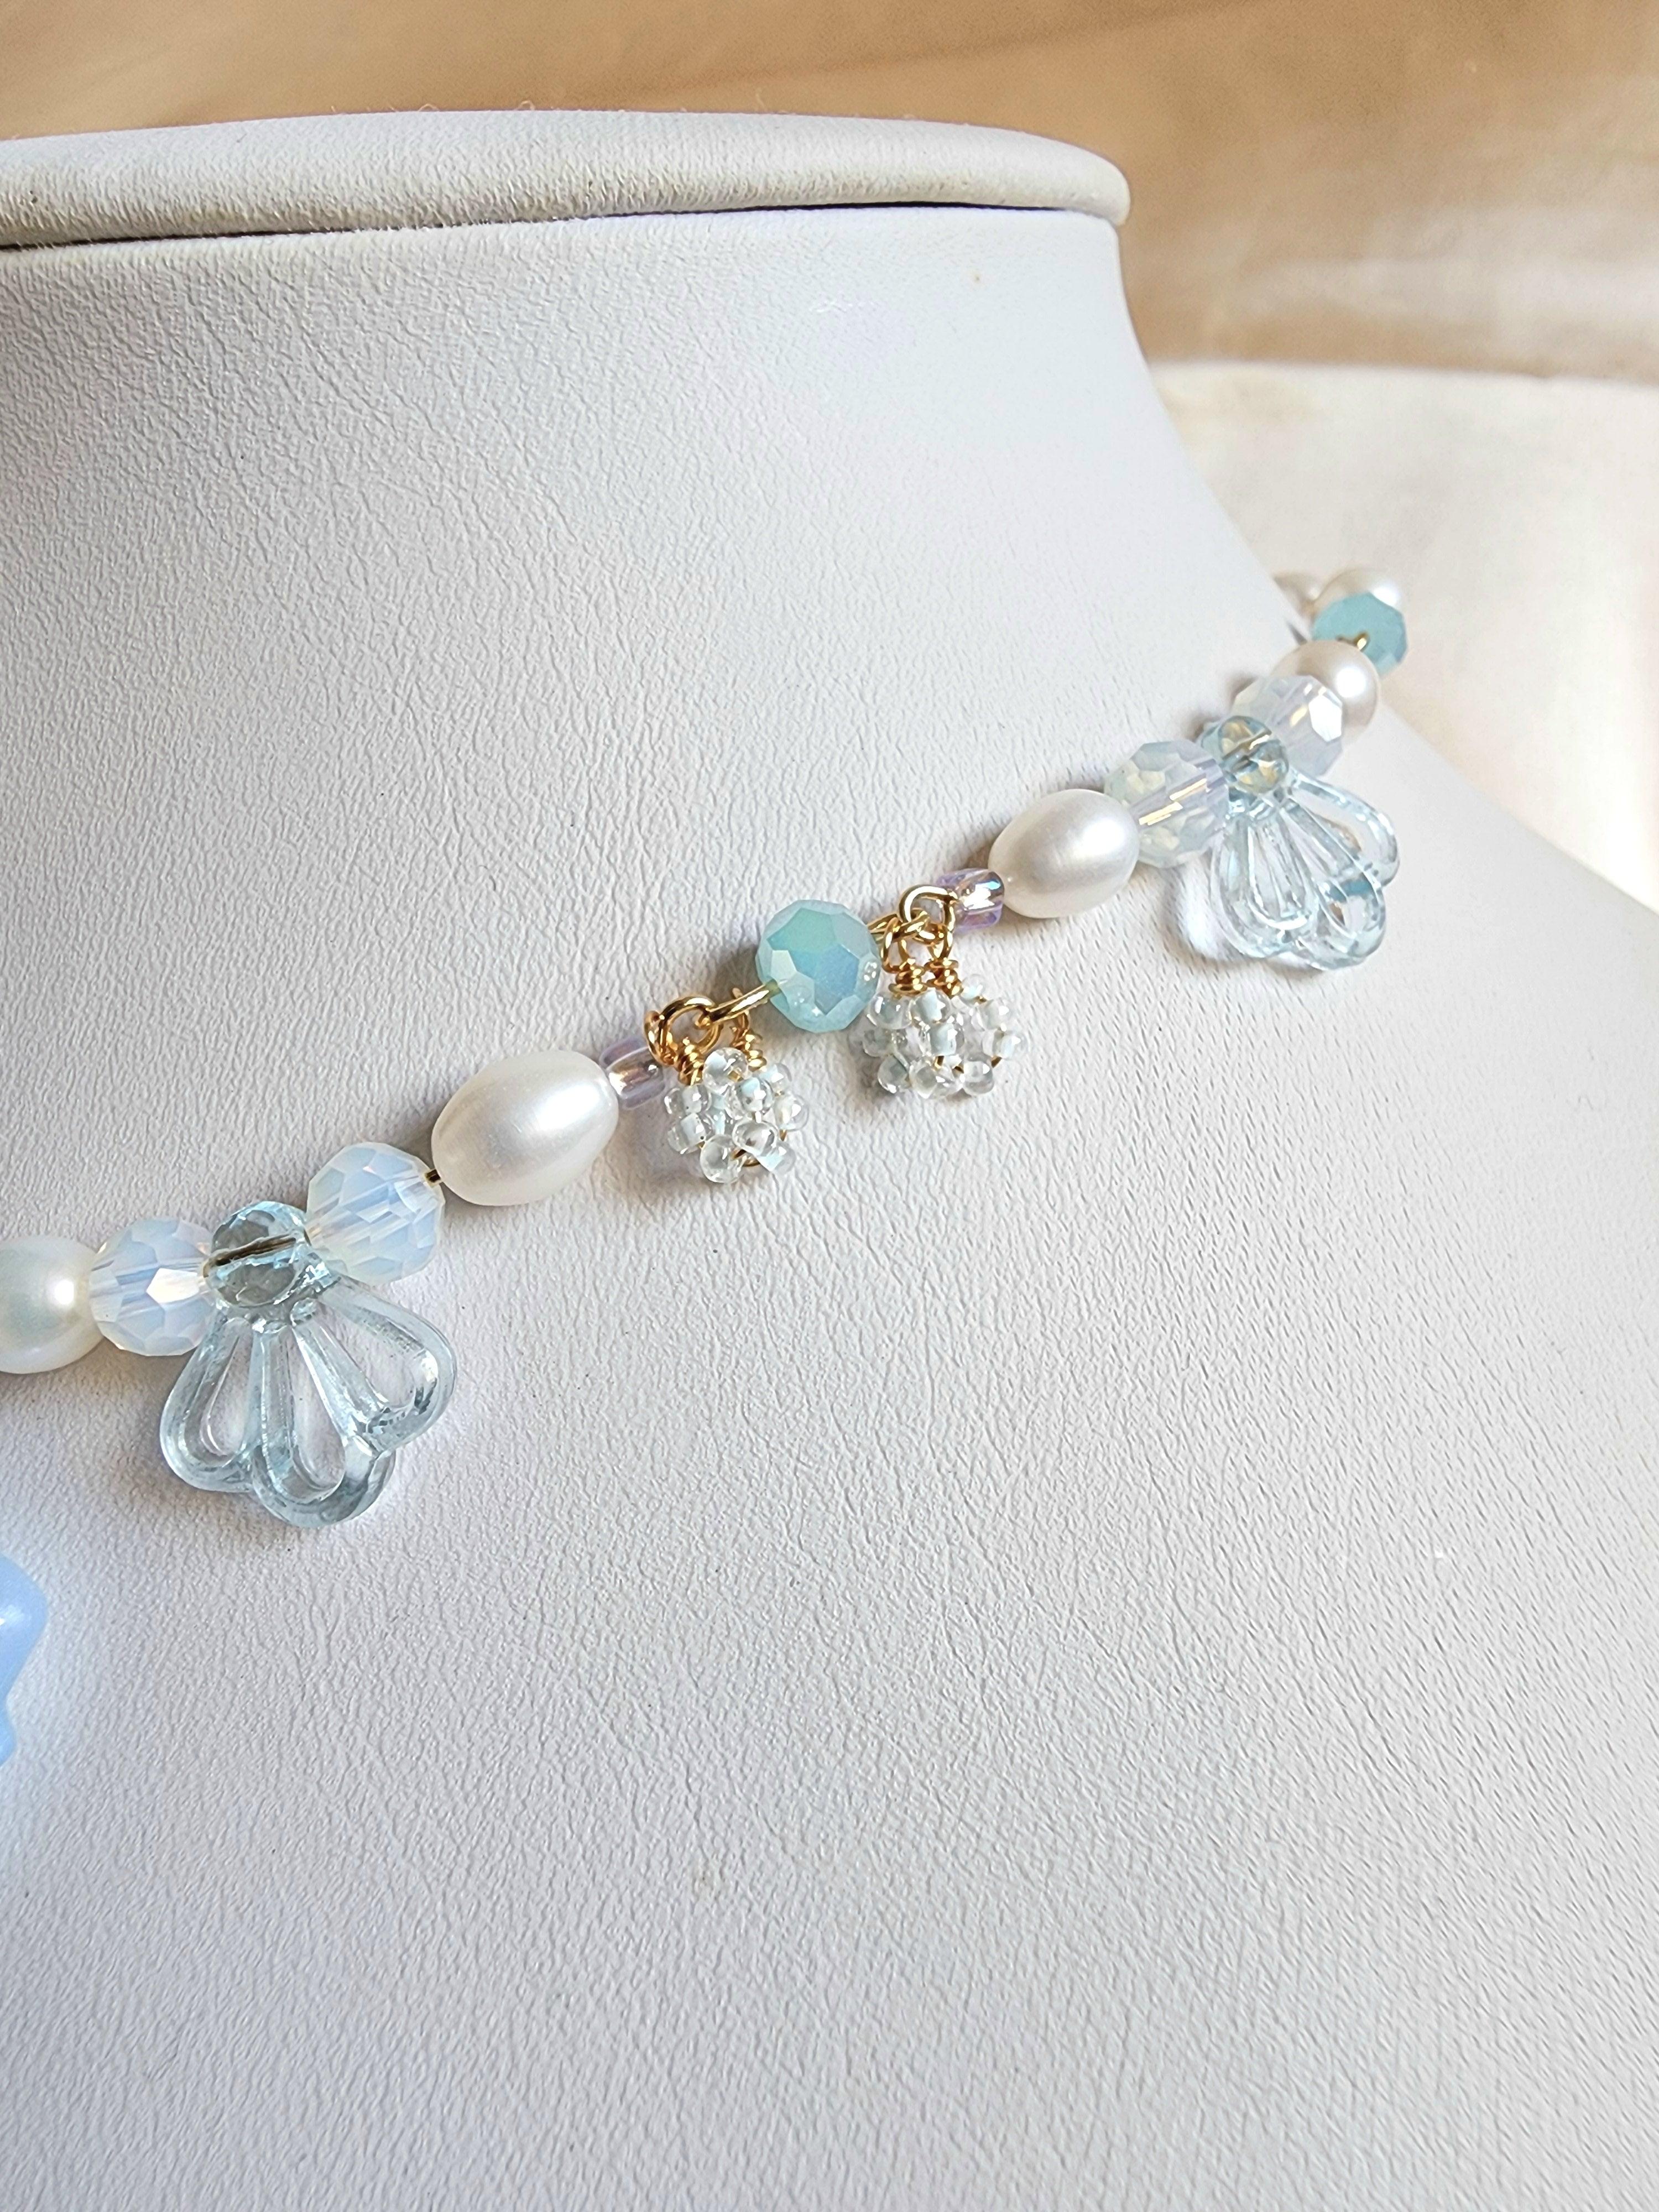 Darling Necklace - Baby Blue - Ynez Project